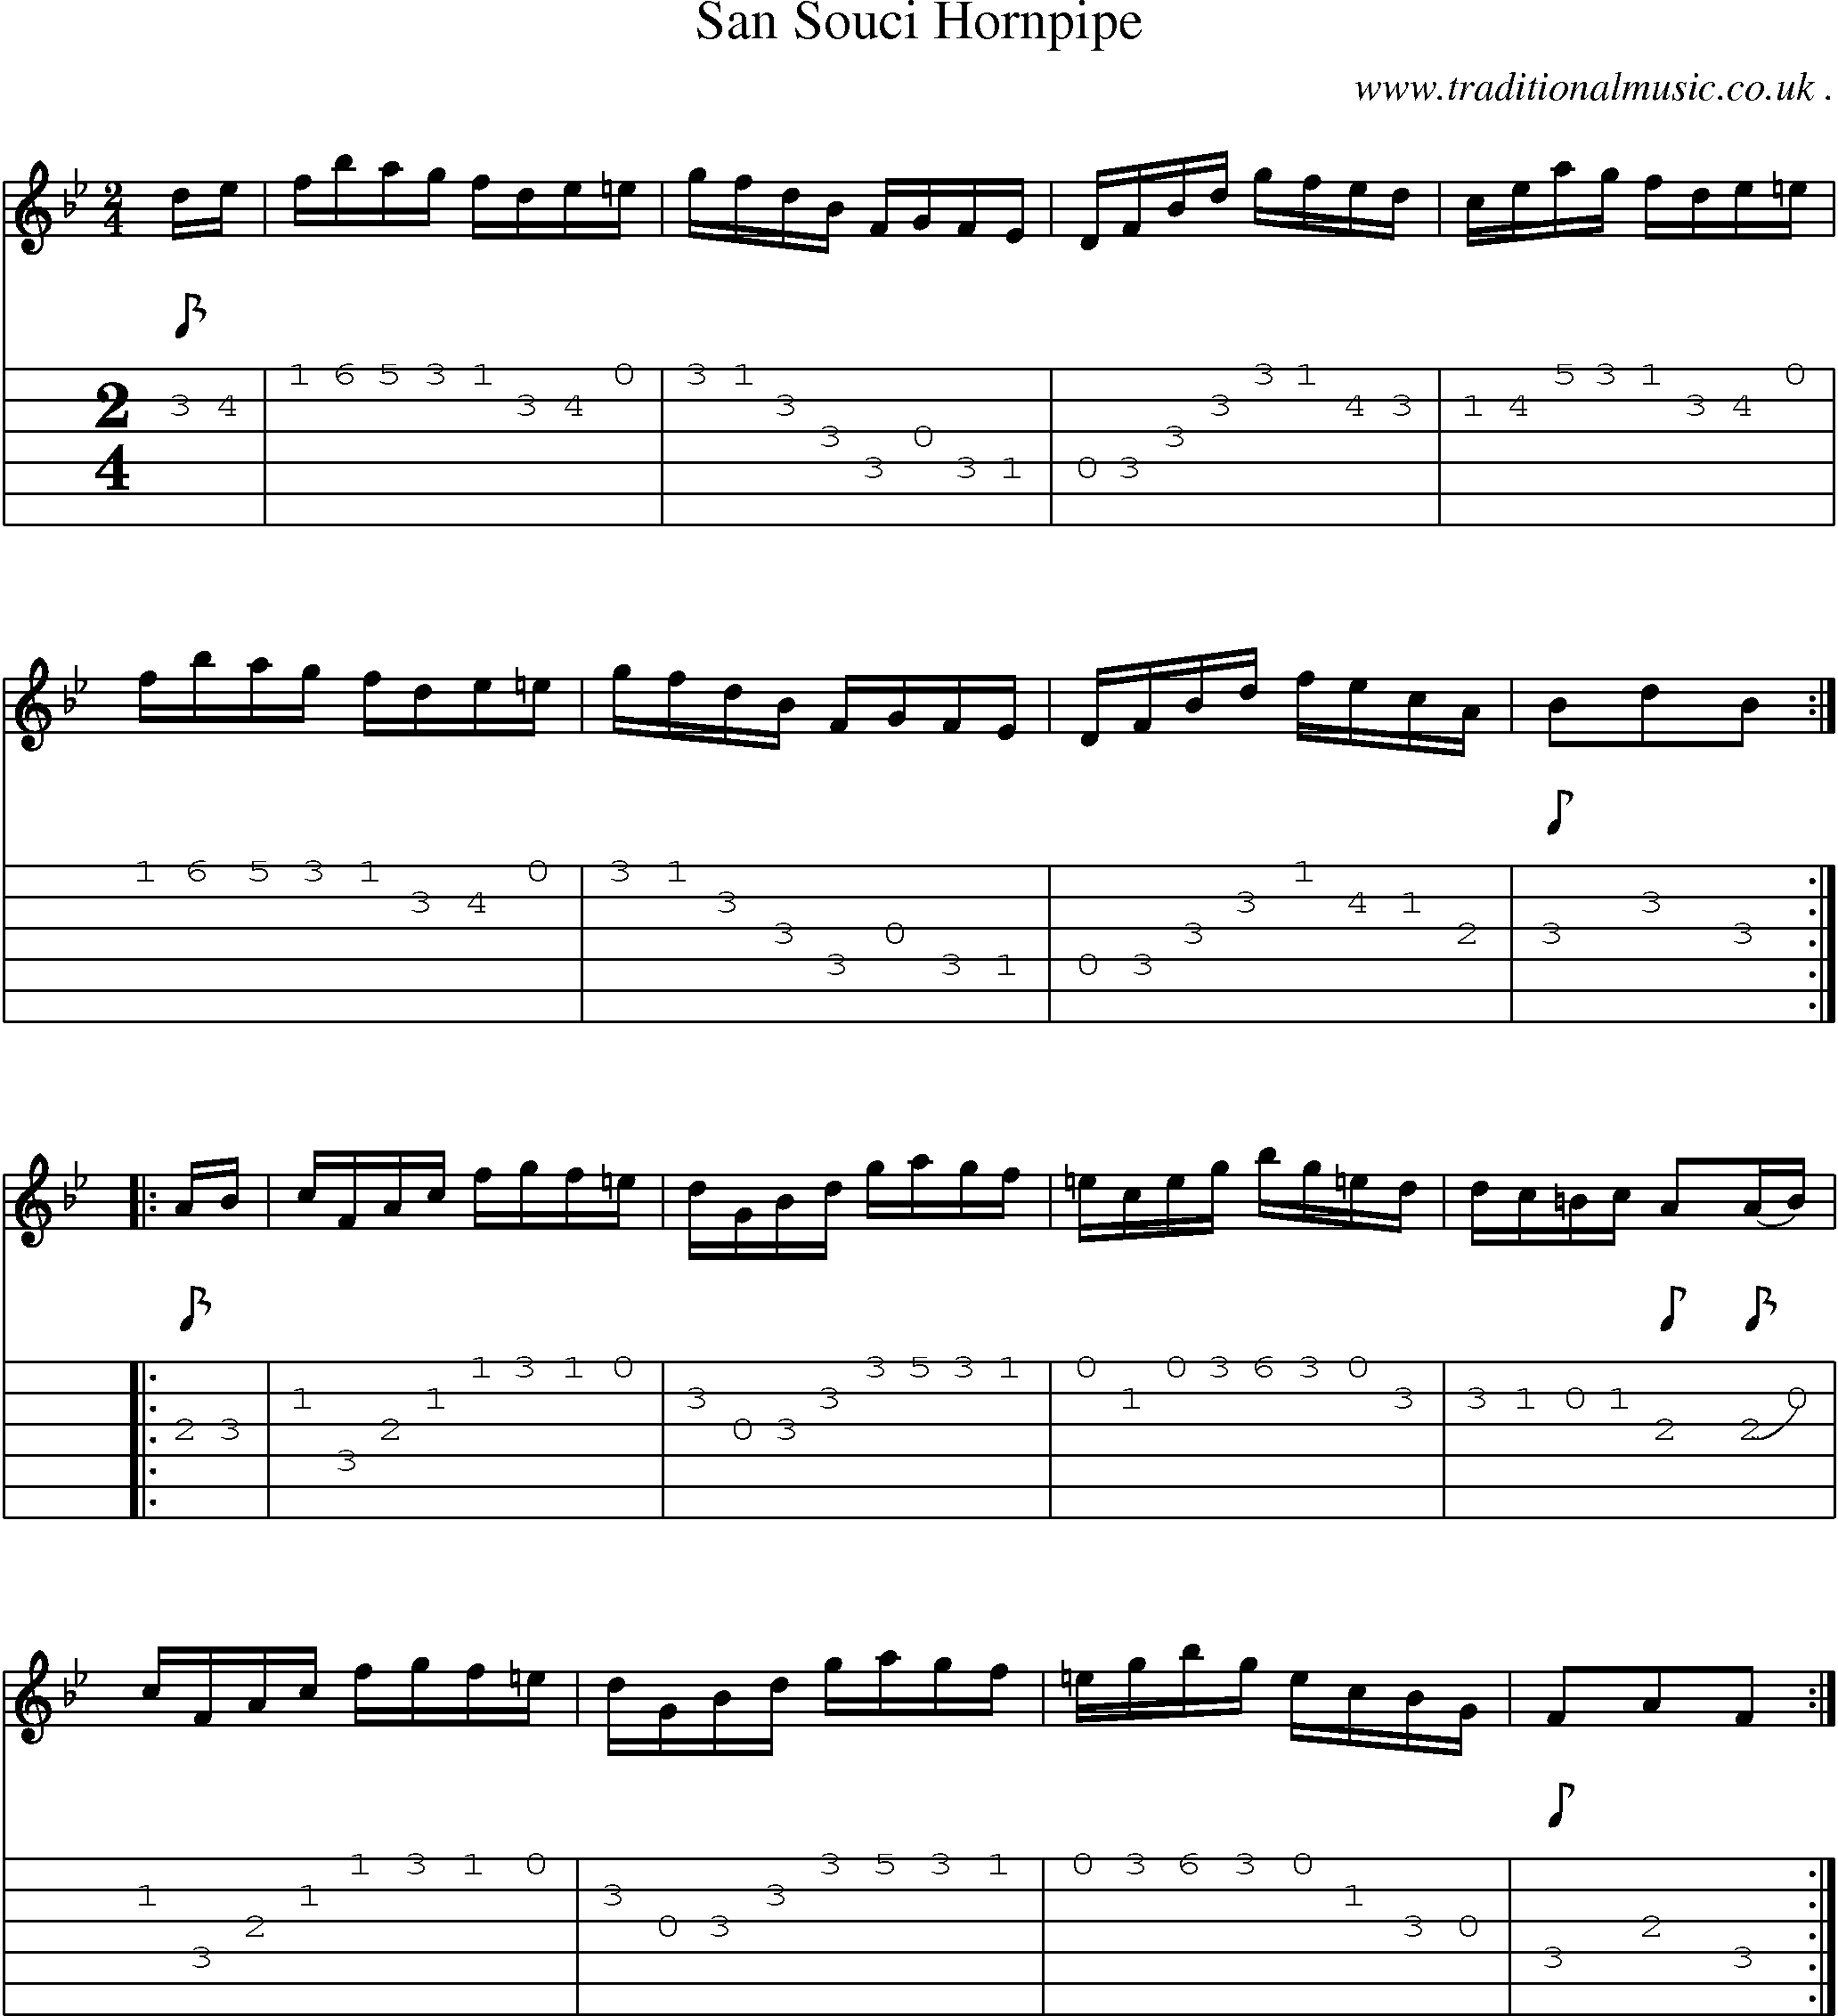 Sheet-Music and Guitar Tabs for San Souci Hornpipe